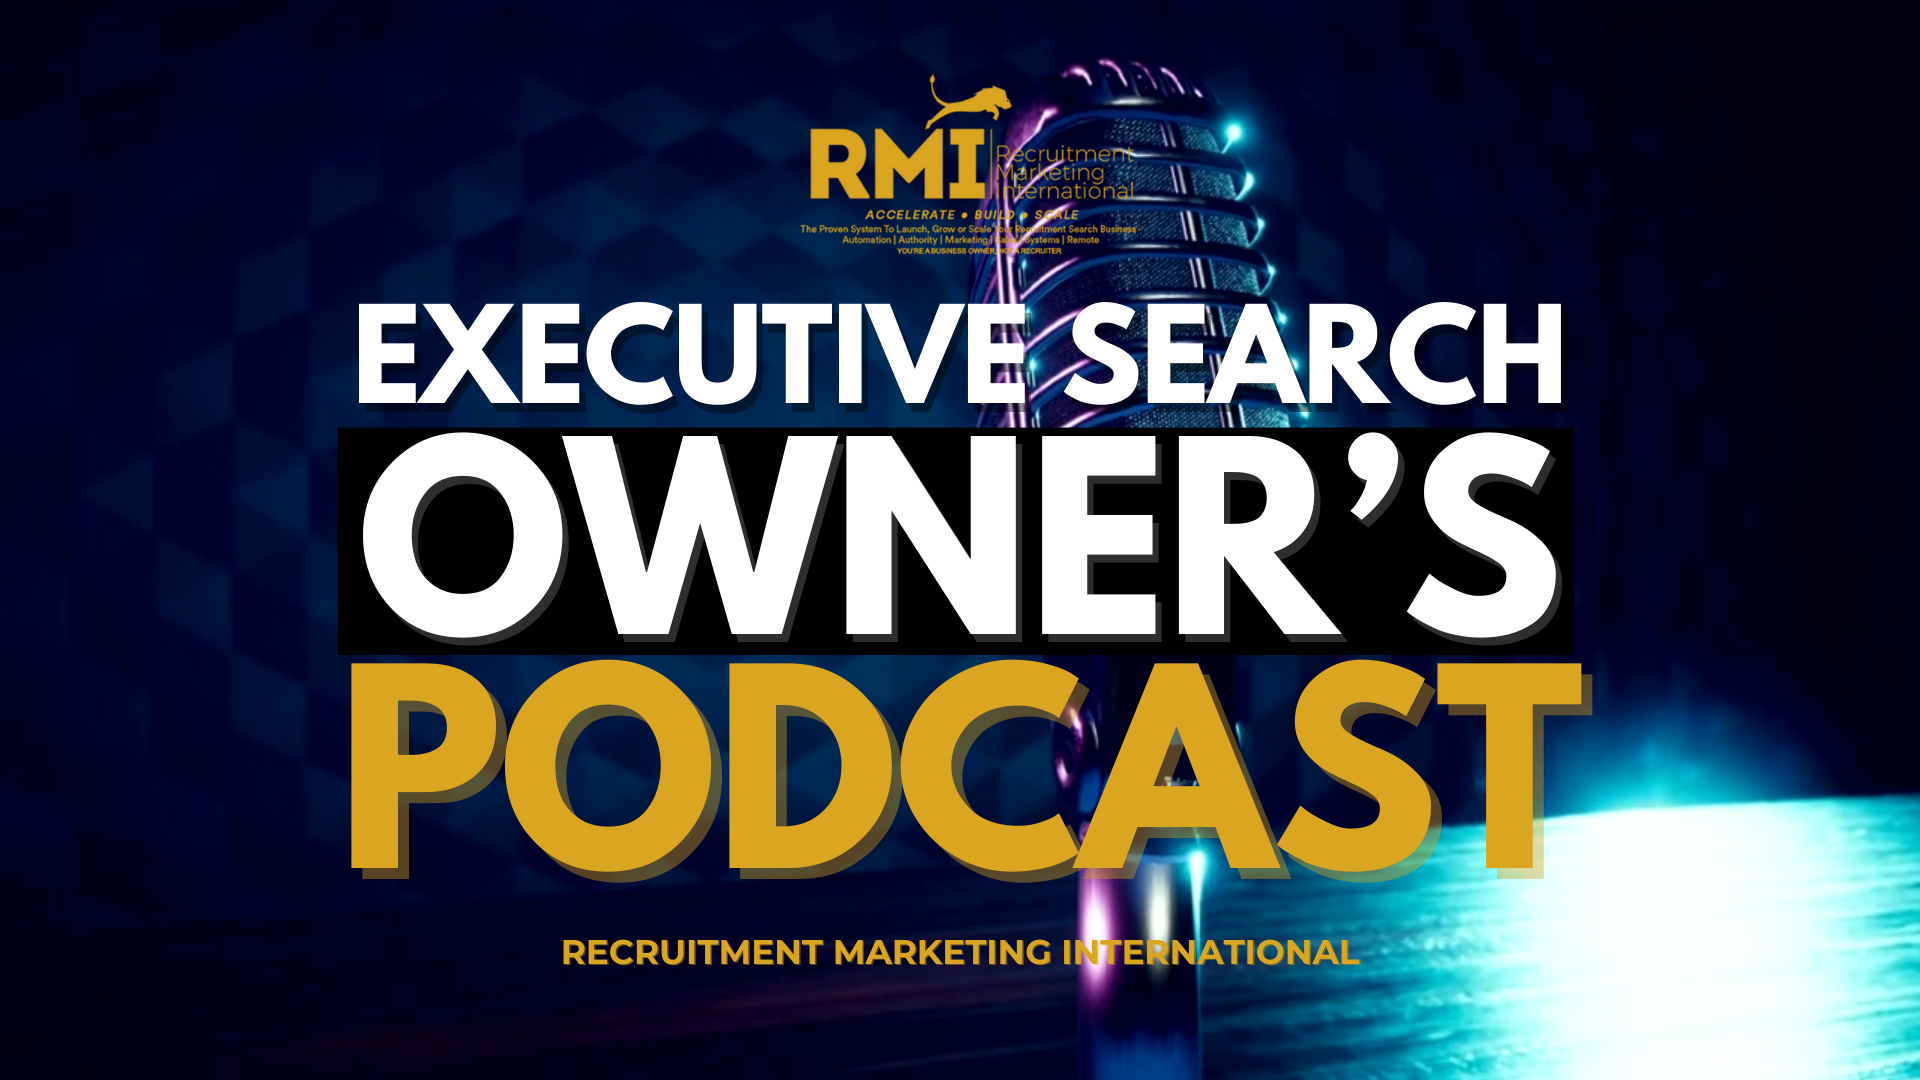 PODCAST 243 – EXECUTIVE SEARCH OWNER’S PODCAST